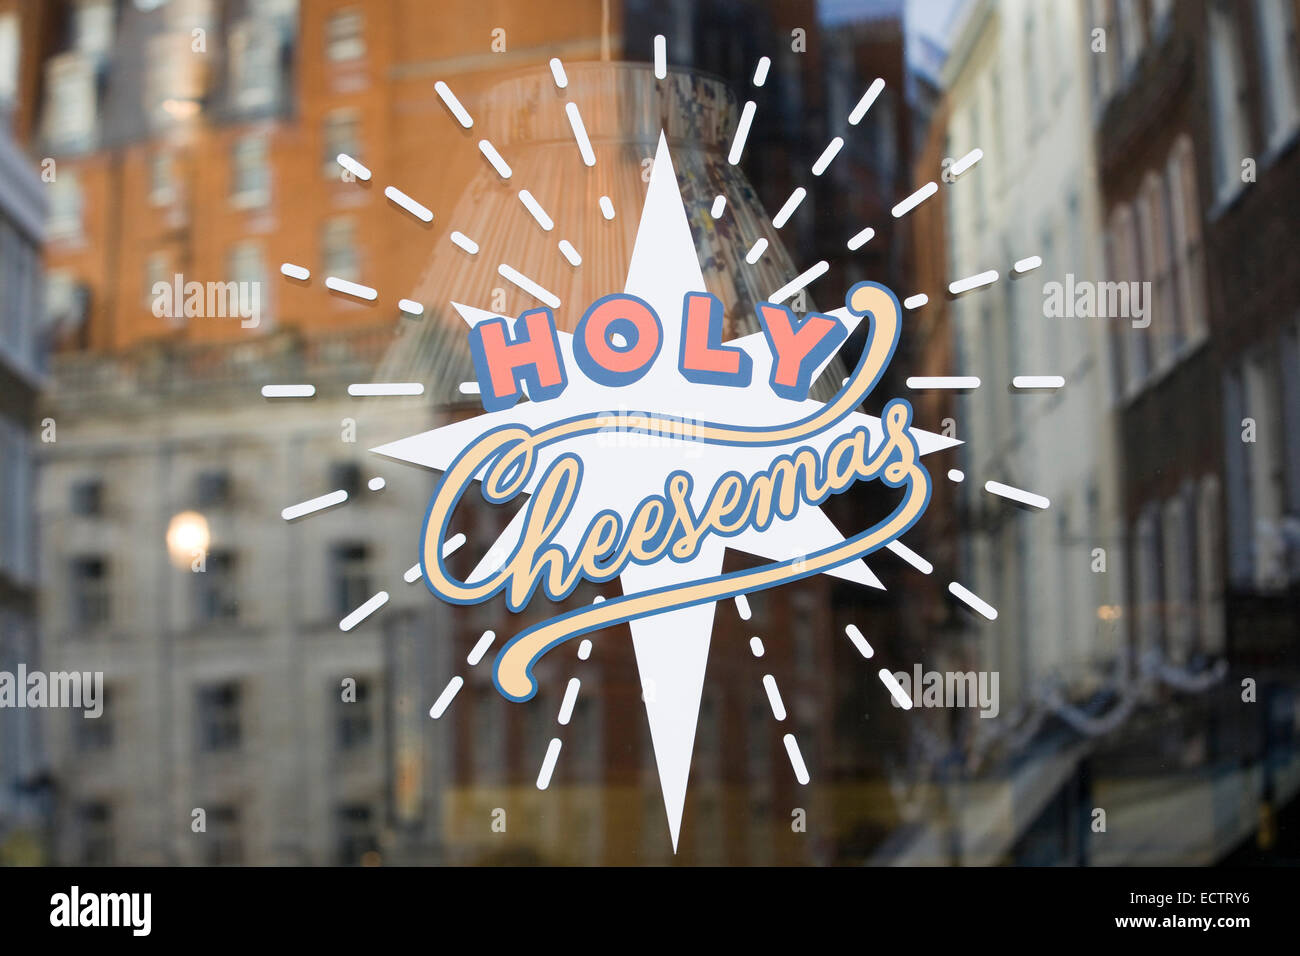 Window sticker with the Saying Holy Cheesemas Stock Photo